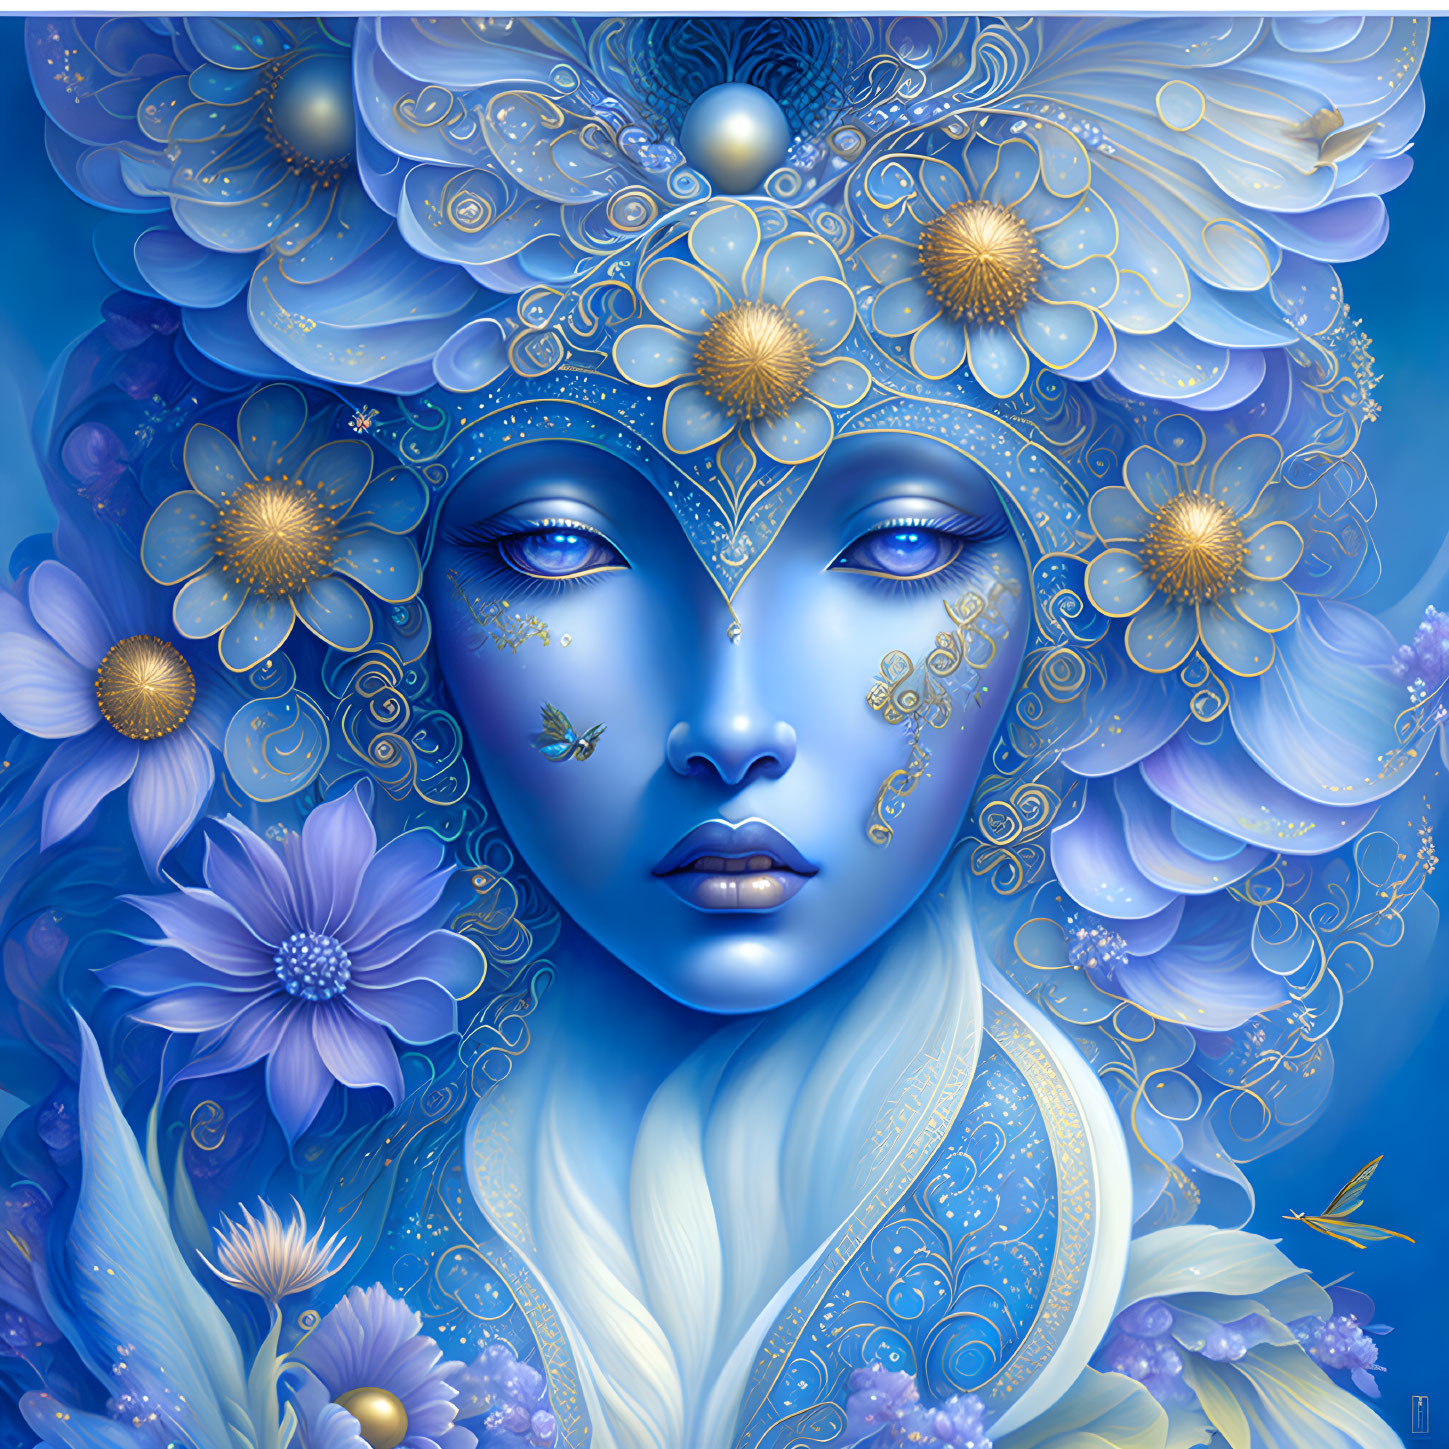 Digital art portrait of female figure with blue skin and golden floral patterns surrounded by stylized blue flowers